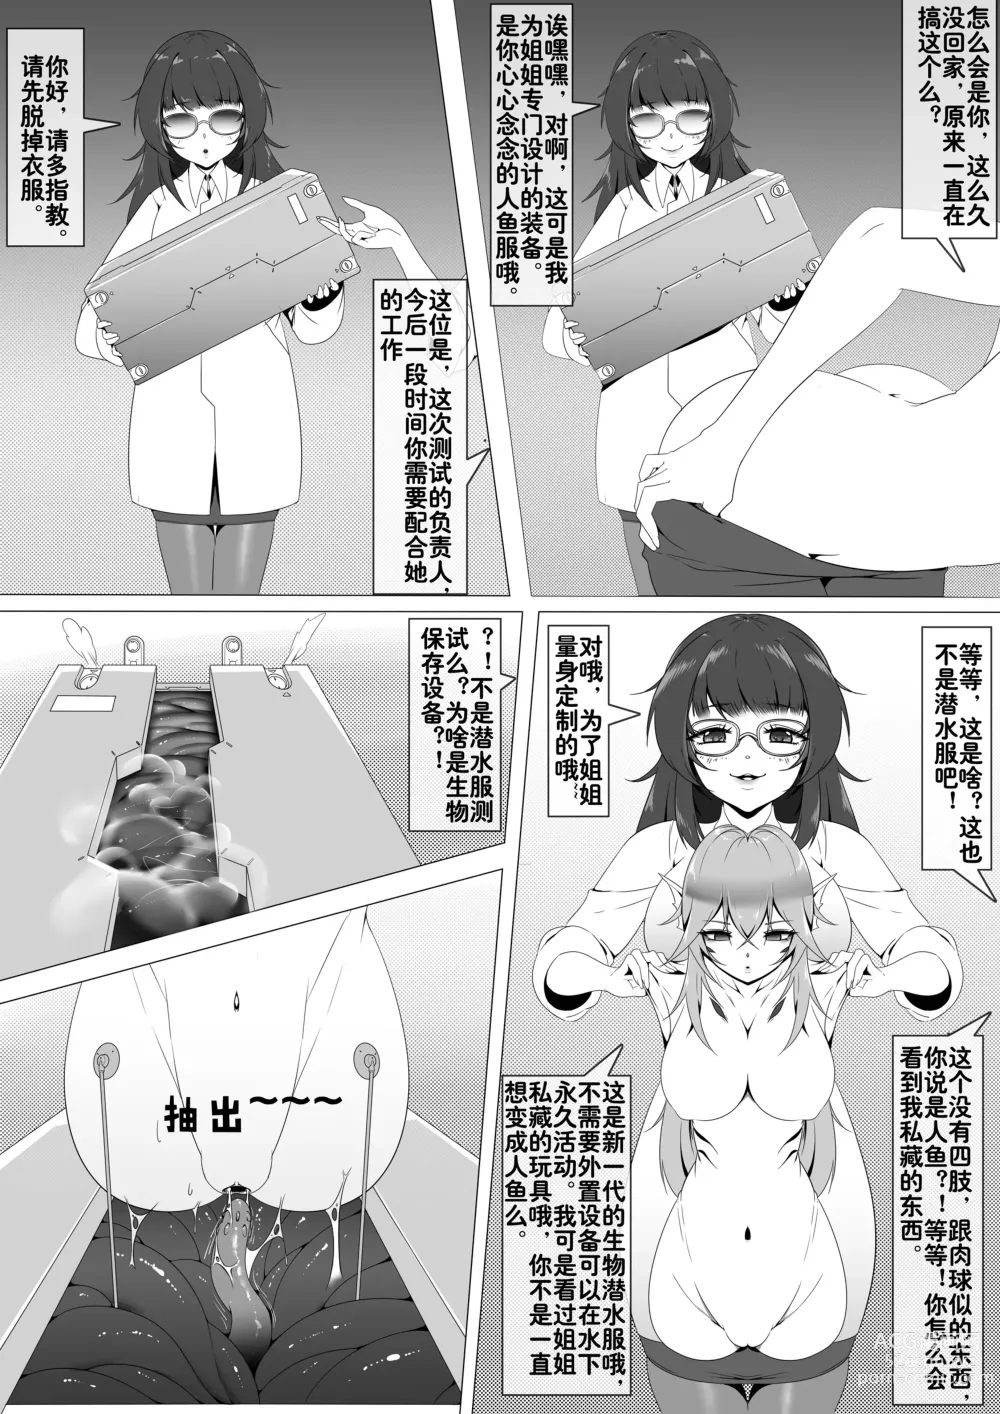 Page 2 of manga 【 The Sword that Can Fly 】Special equipment